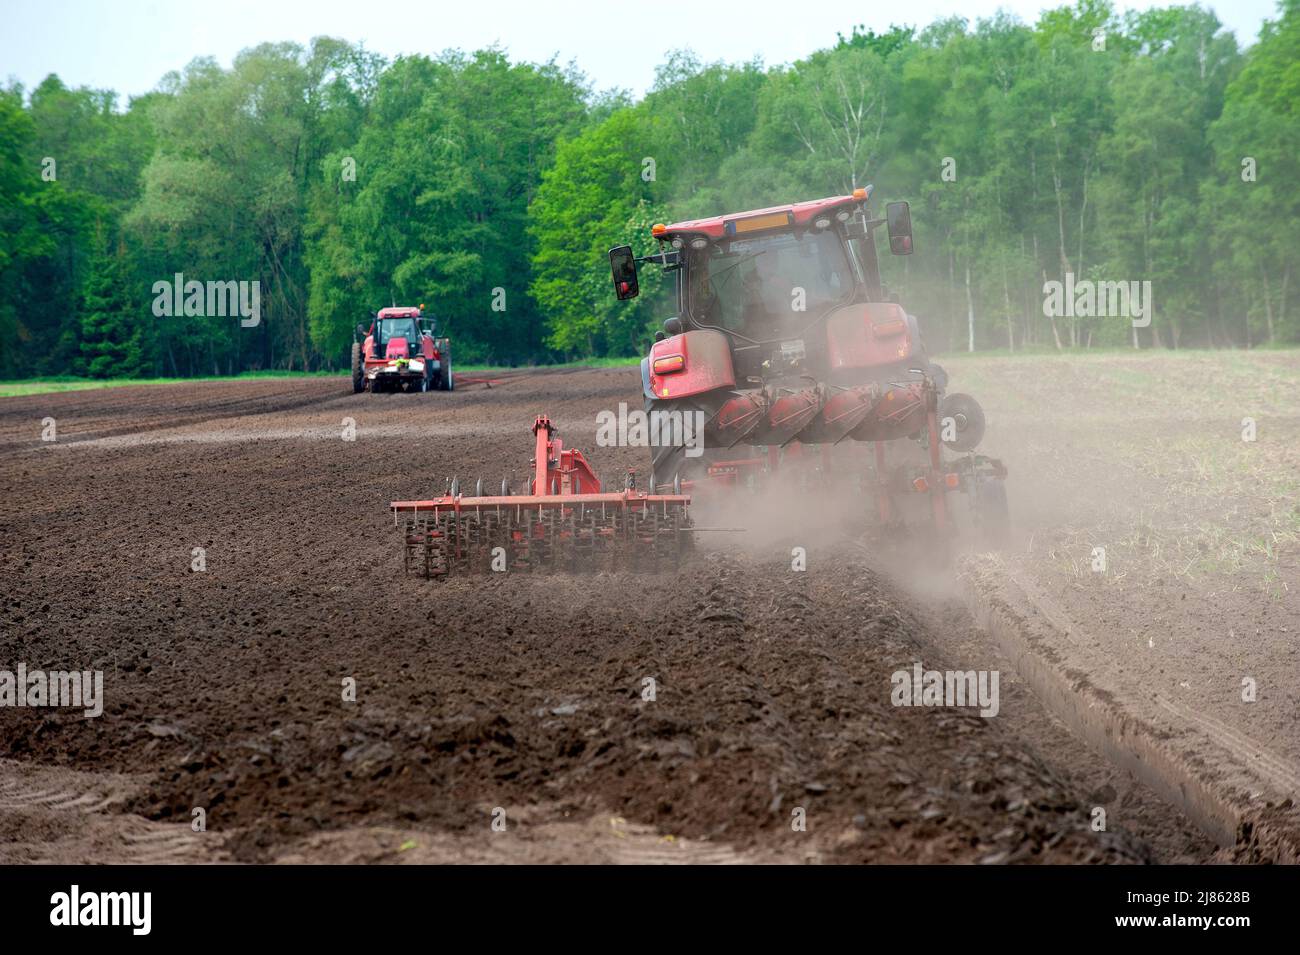 A farmer is plowing his dry farmland, while another machine on the left is busy seeding potatoes. Stock Photo